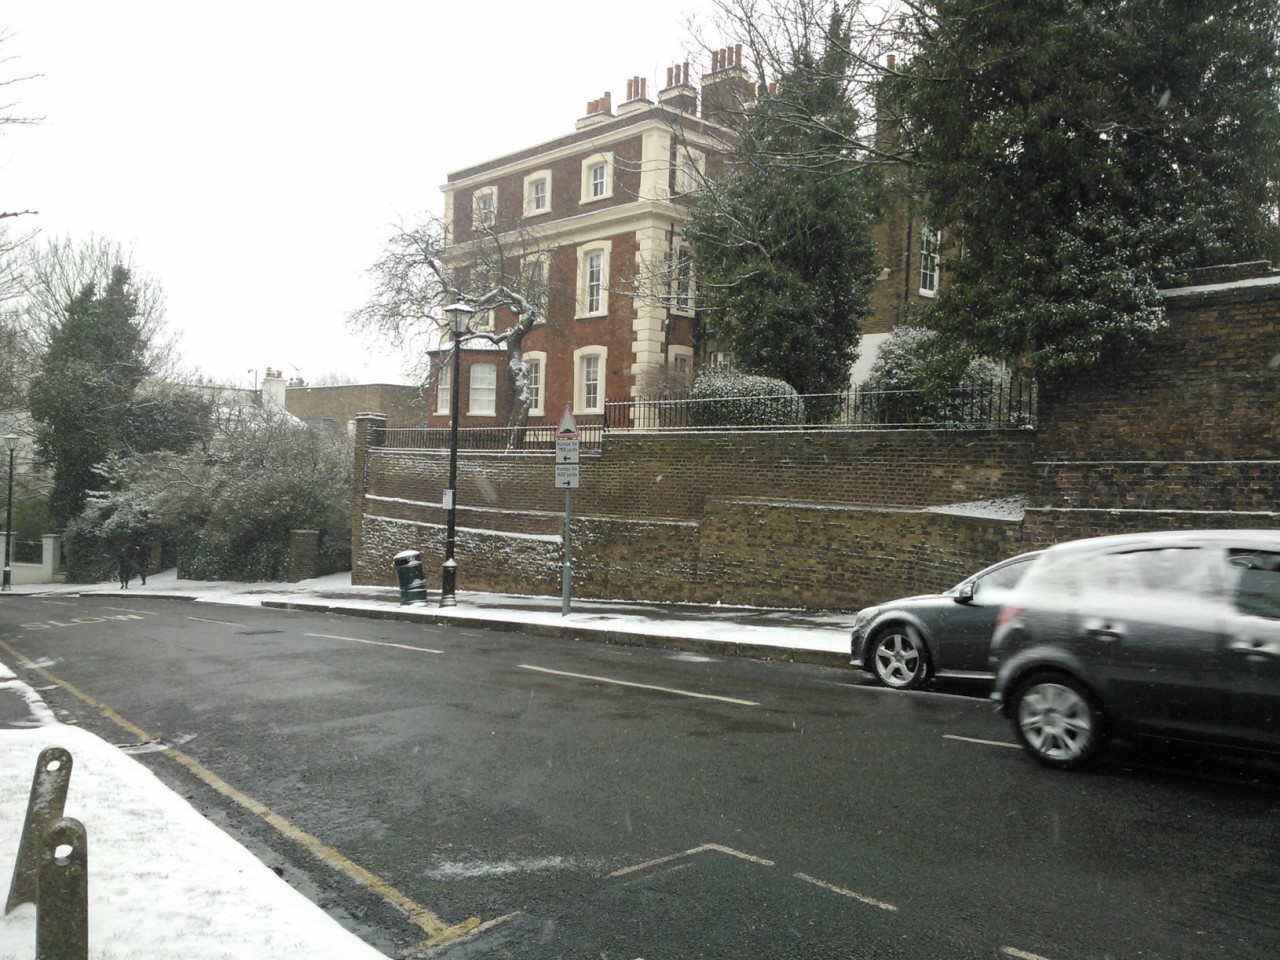 i took a picture of a beautiful house opposite my school - in typical british style, we were let out of school early today&#8230; because there was too much snow. So I went home, wrapped myself in blankets and had a cup of tea